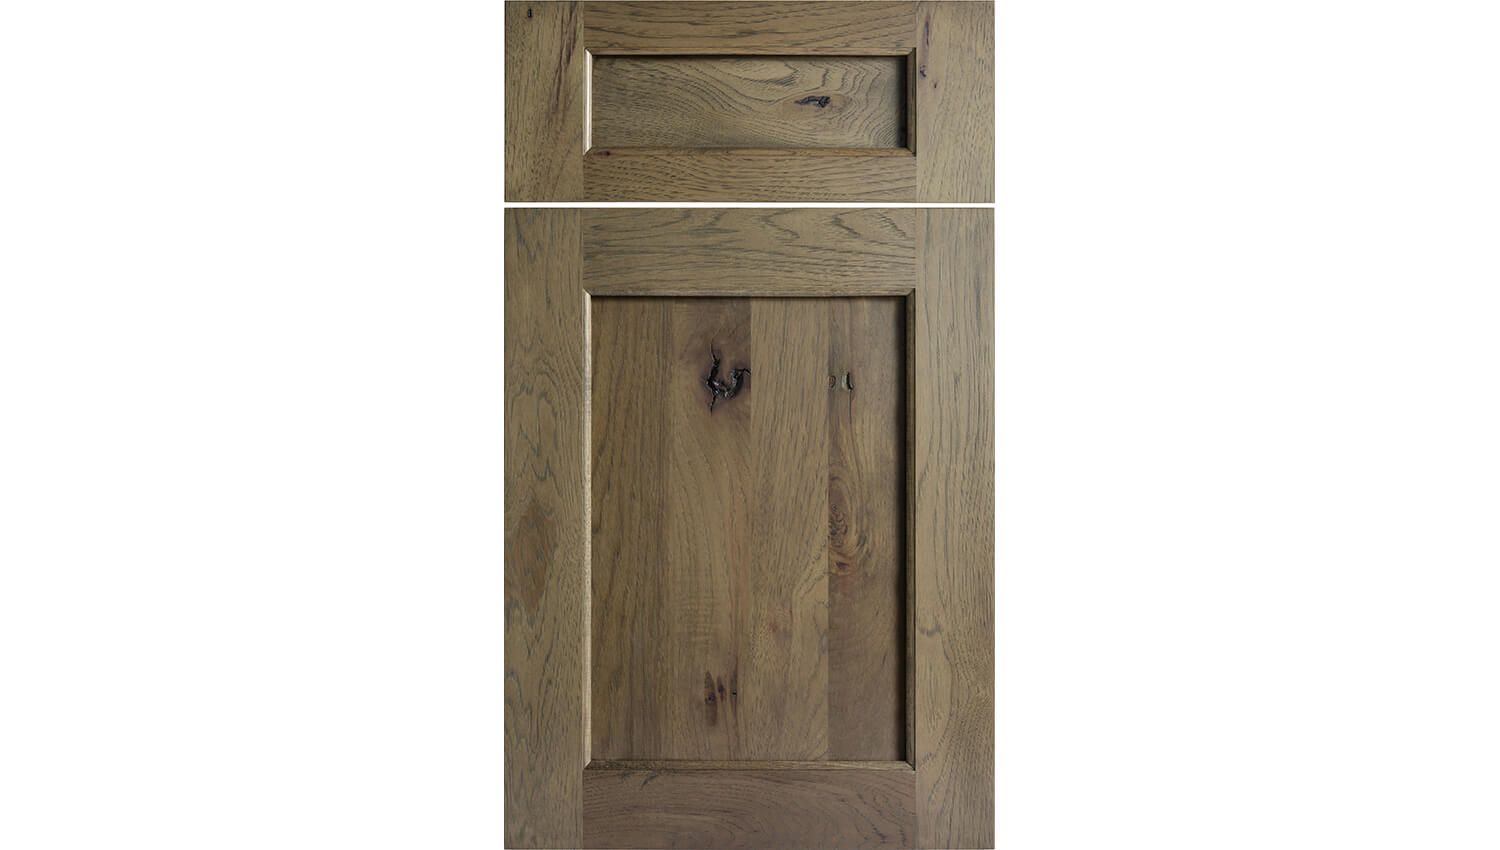 The Highland door is a classic shaker cabinet door shown here in the rustic hickory wood with a true-brown stained finish.